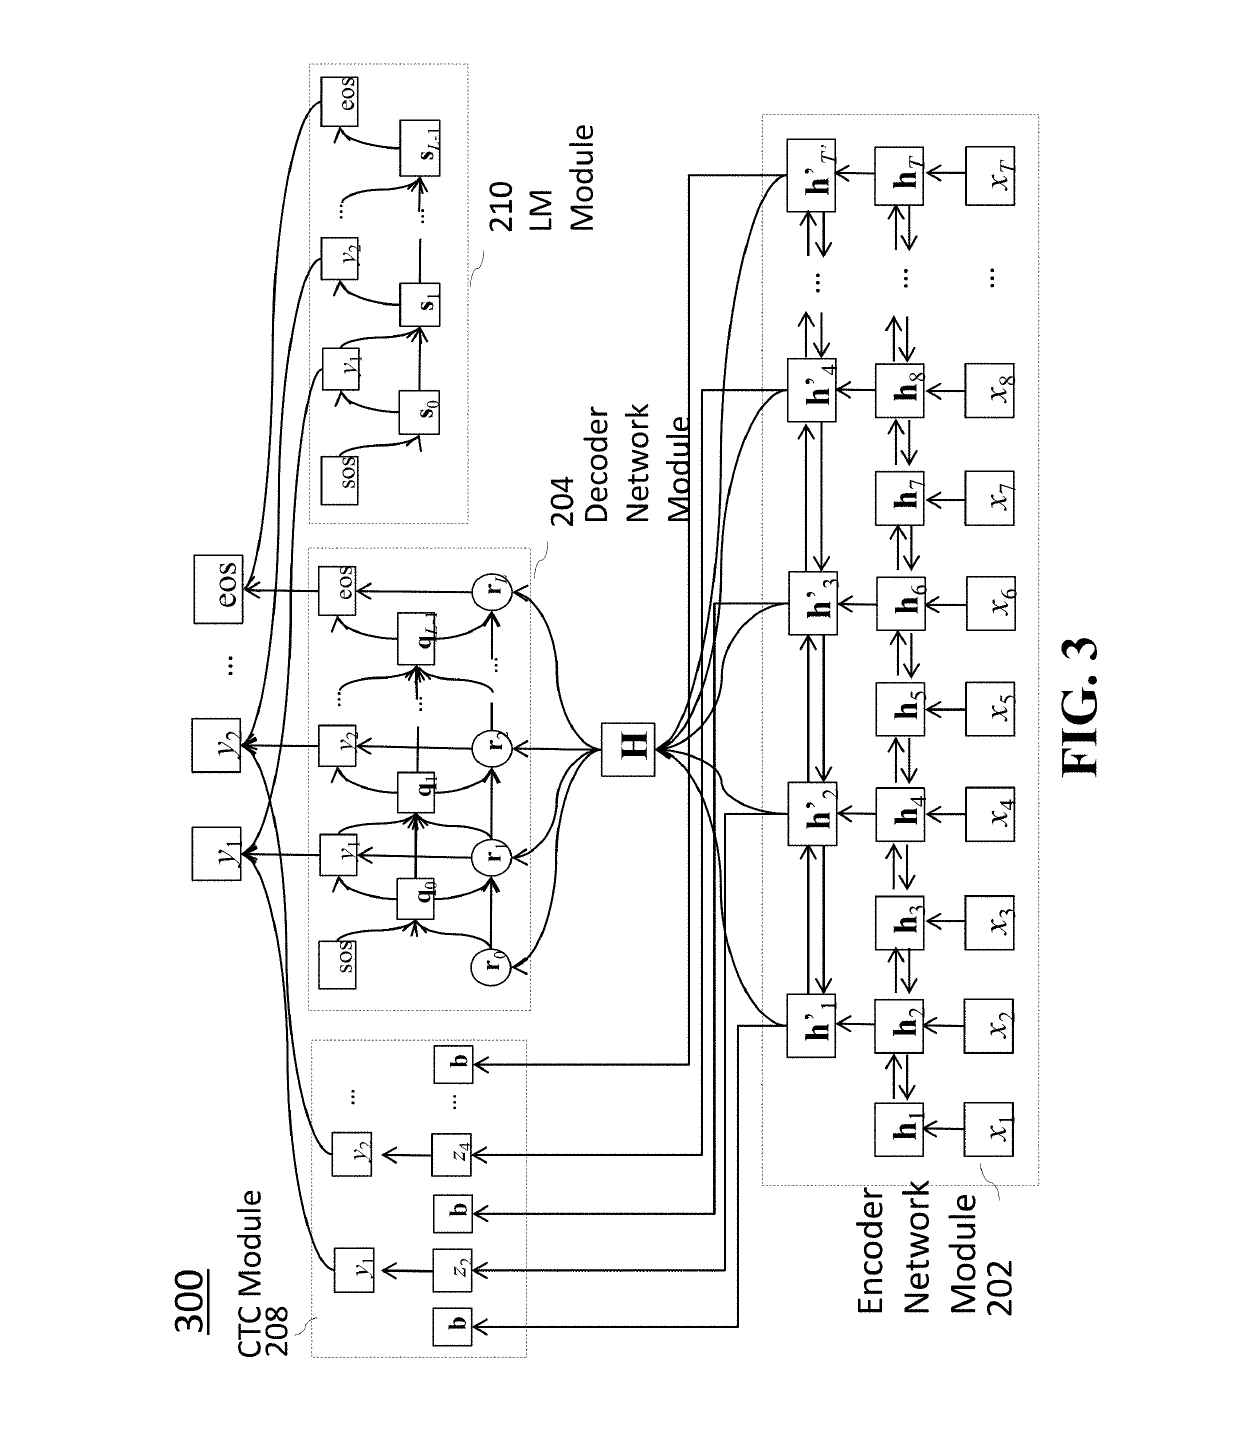 Method and Apparatus for Open-Vocabulary End-to-End Speech Recognition